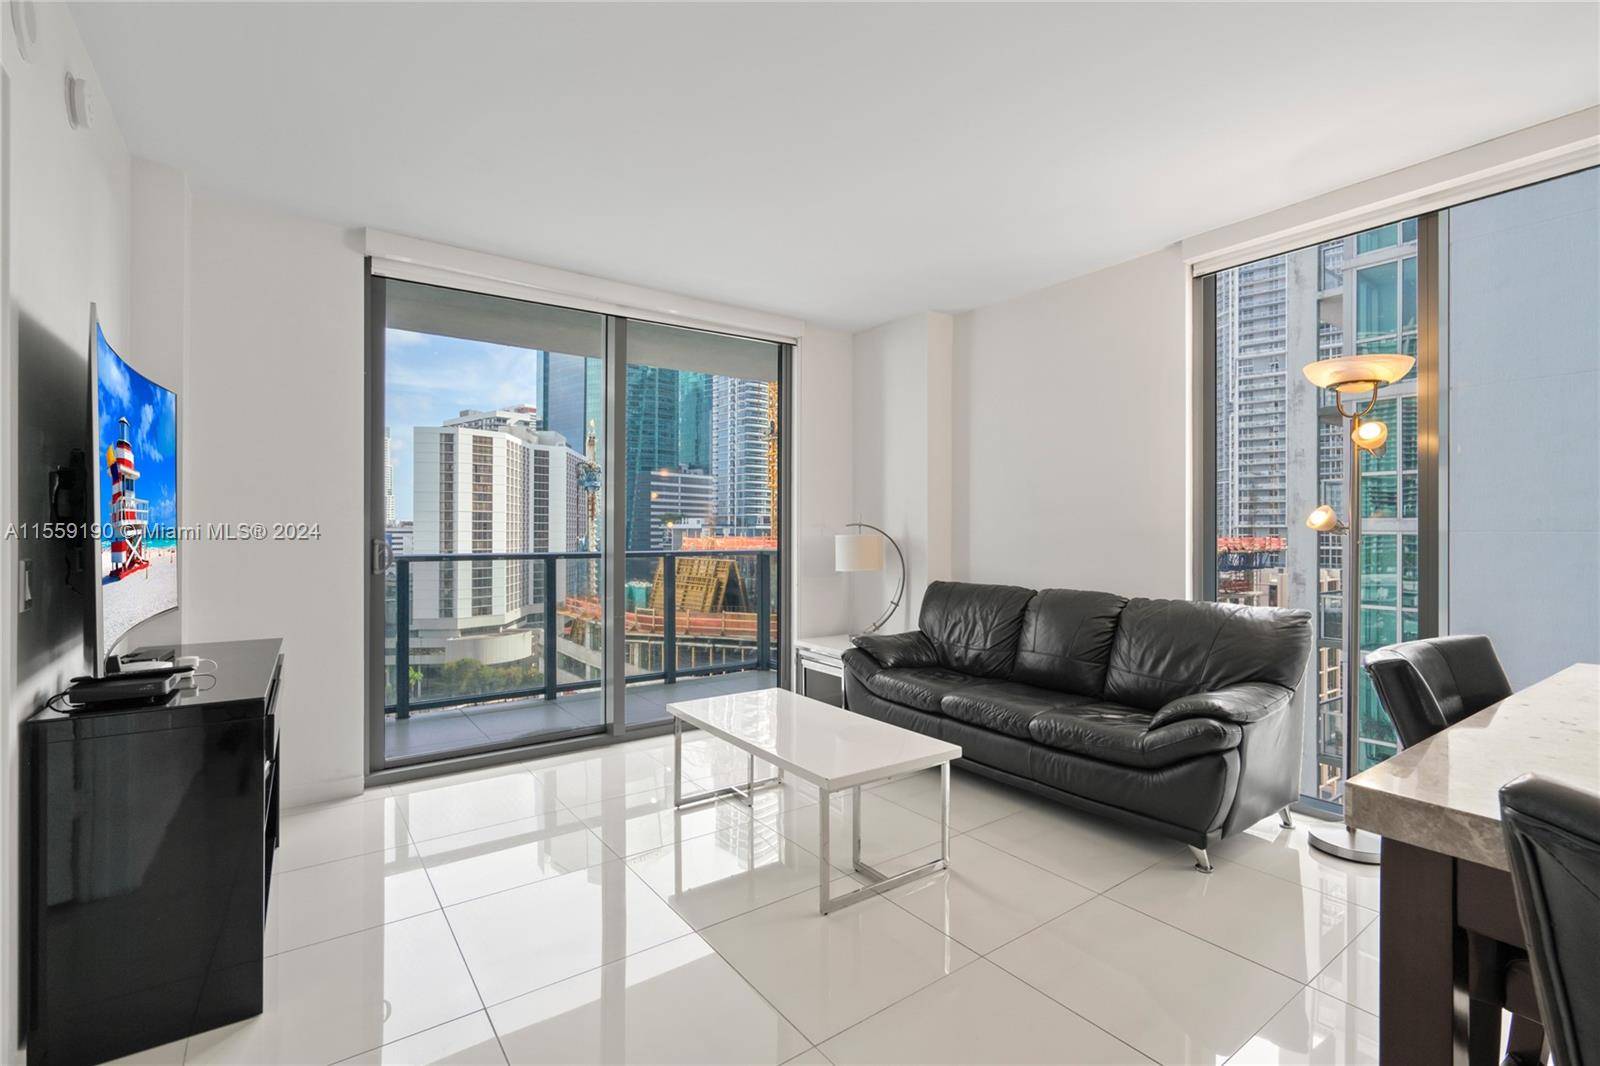 Desirable furnished 2 bedroom 2 bathroom unit at modern boutique building My Brickell.